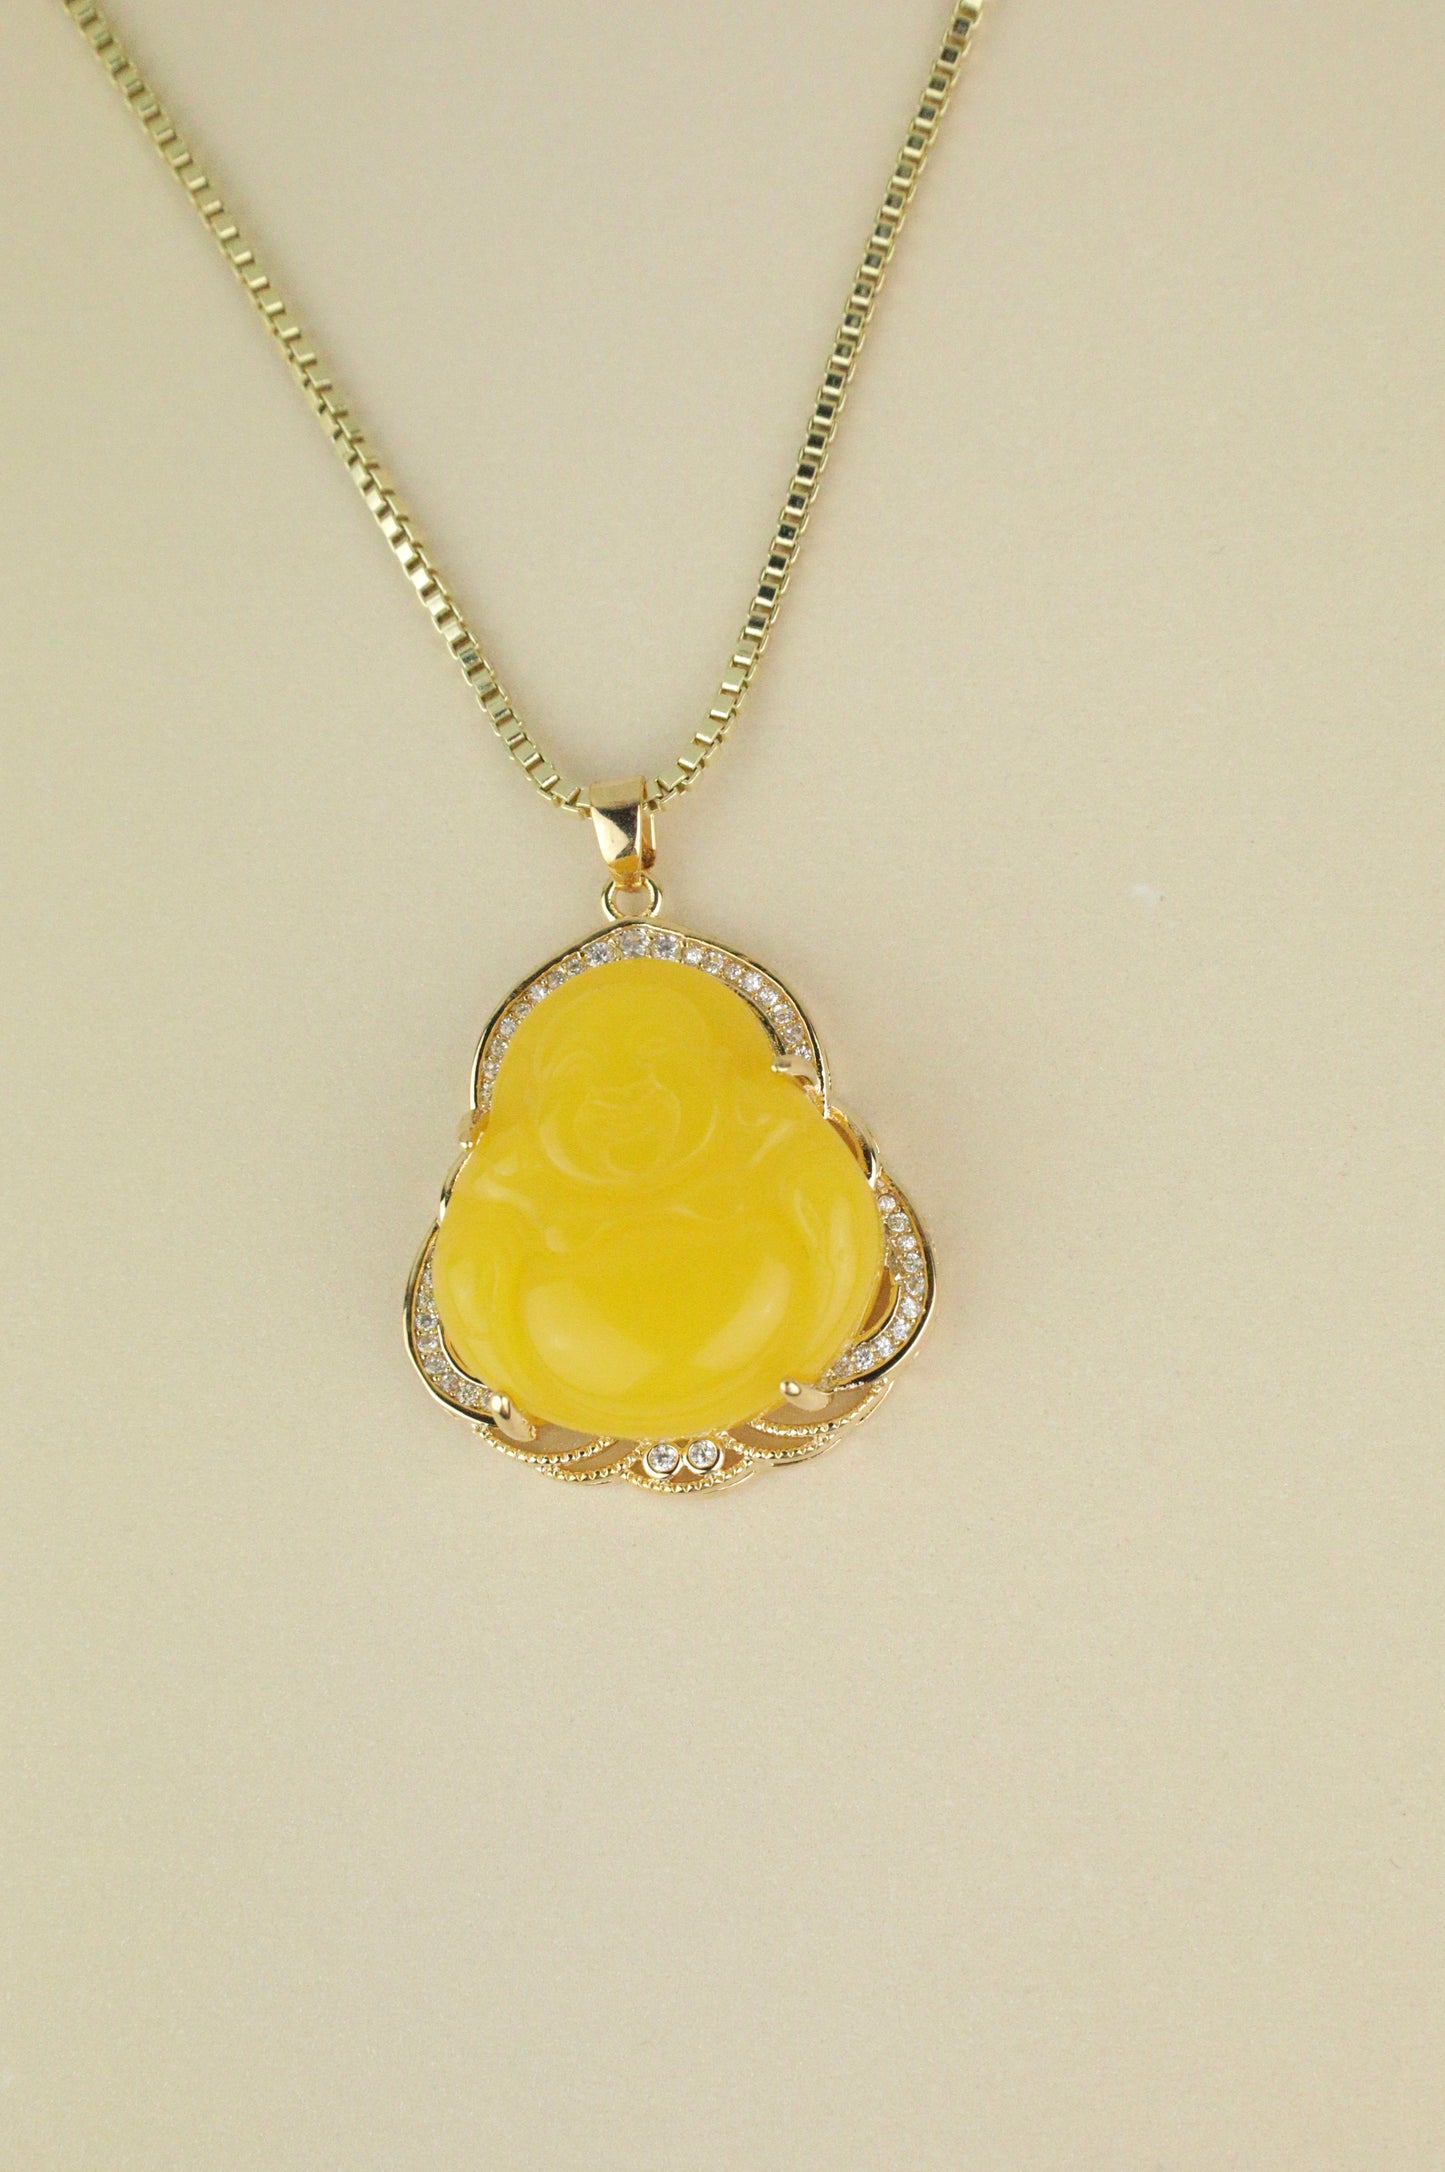 Yellow Buddha necklace in gold